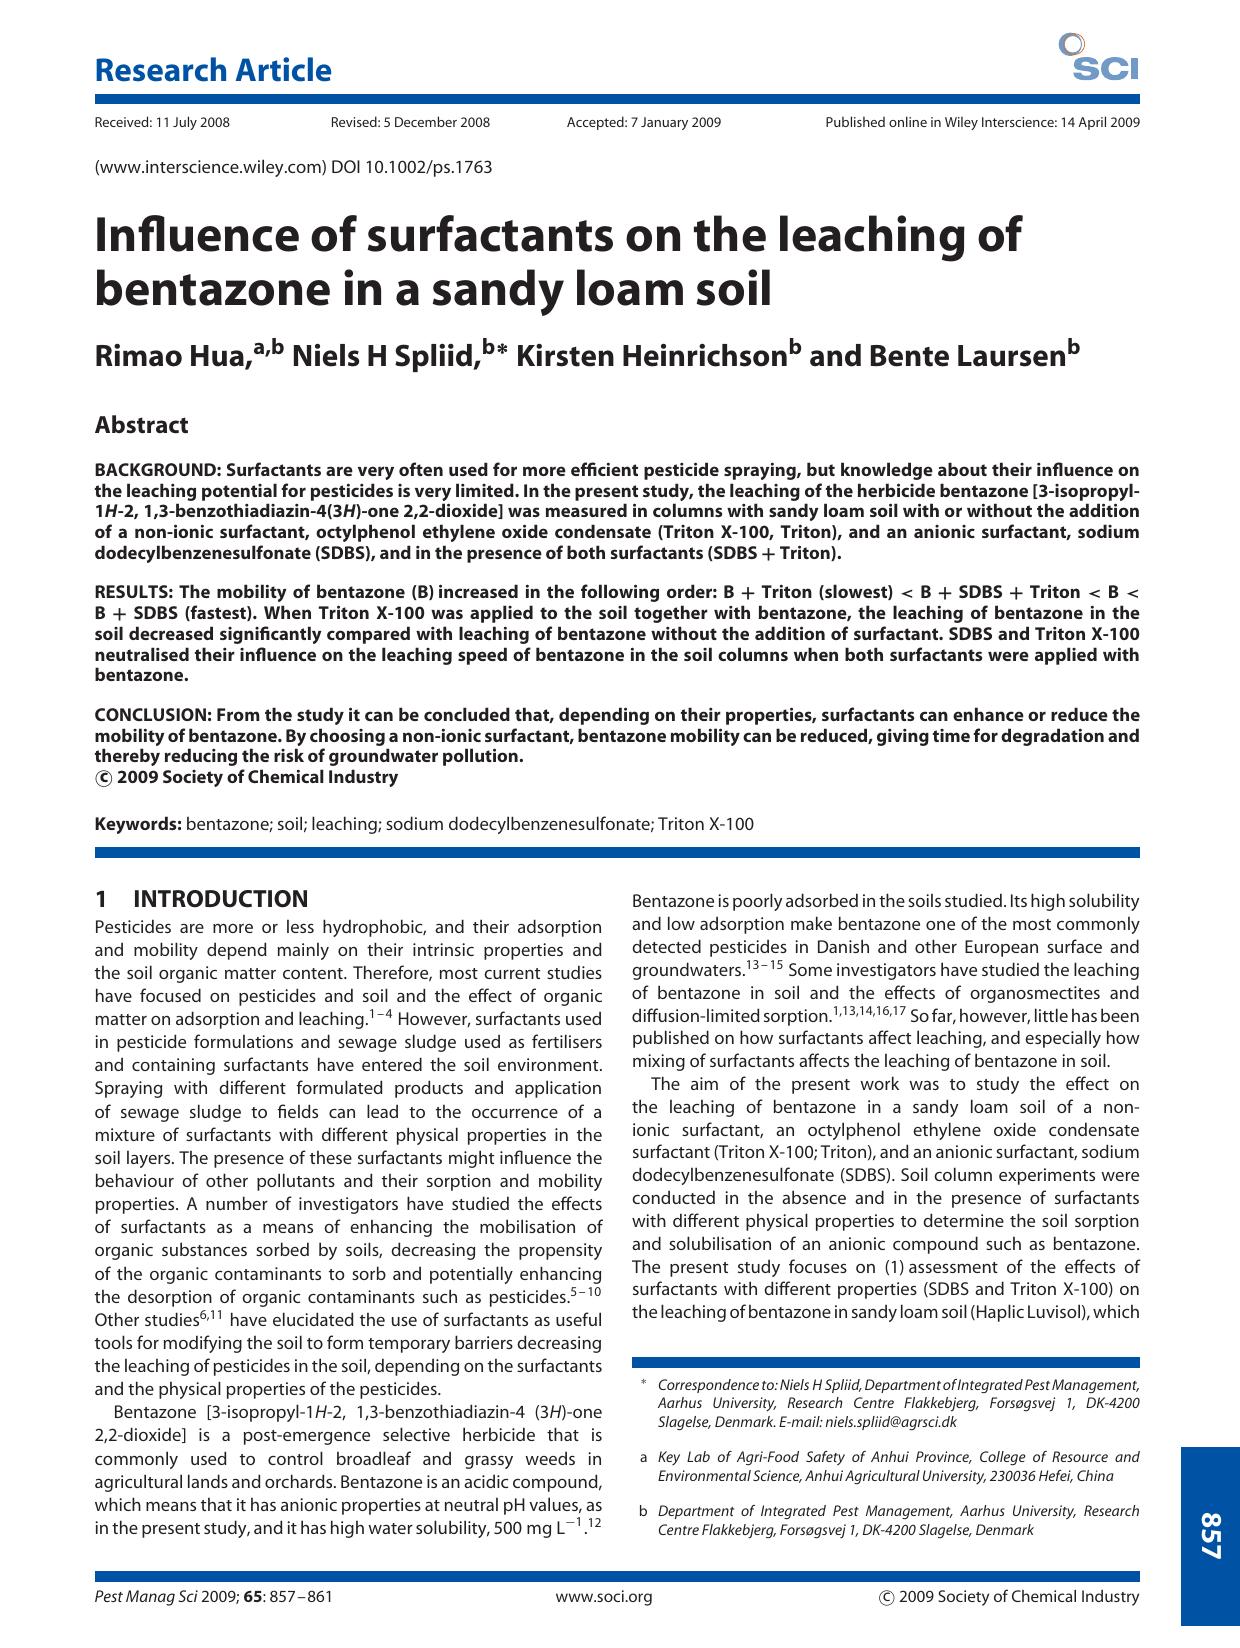 Influence of surfactants on the leaching of bentazone in a sandy loam soil by Unknown